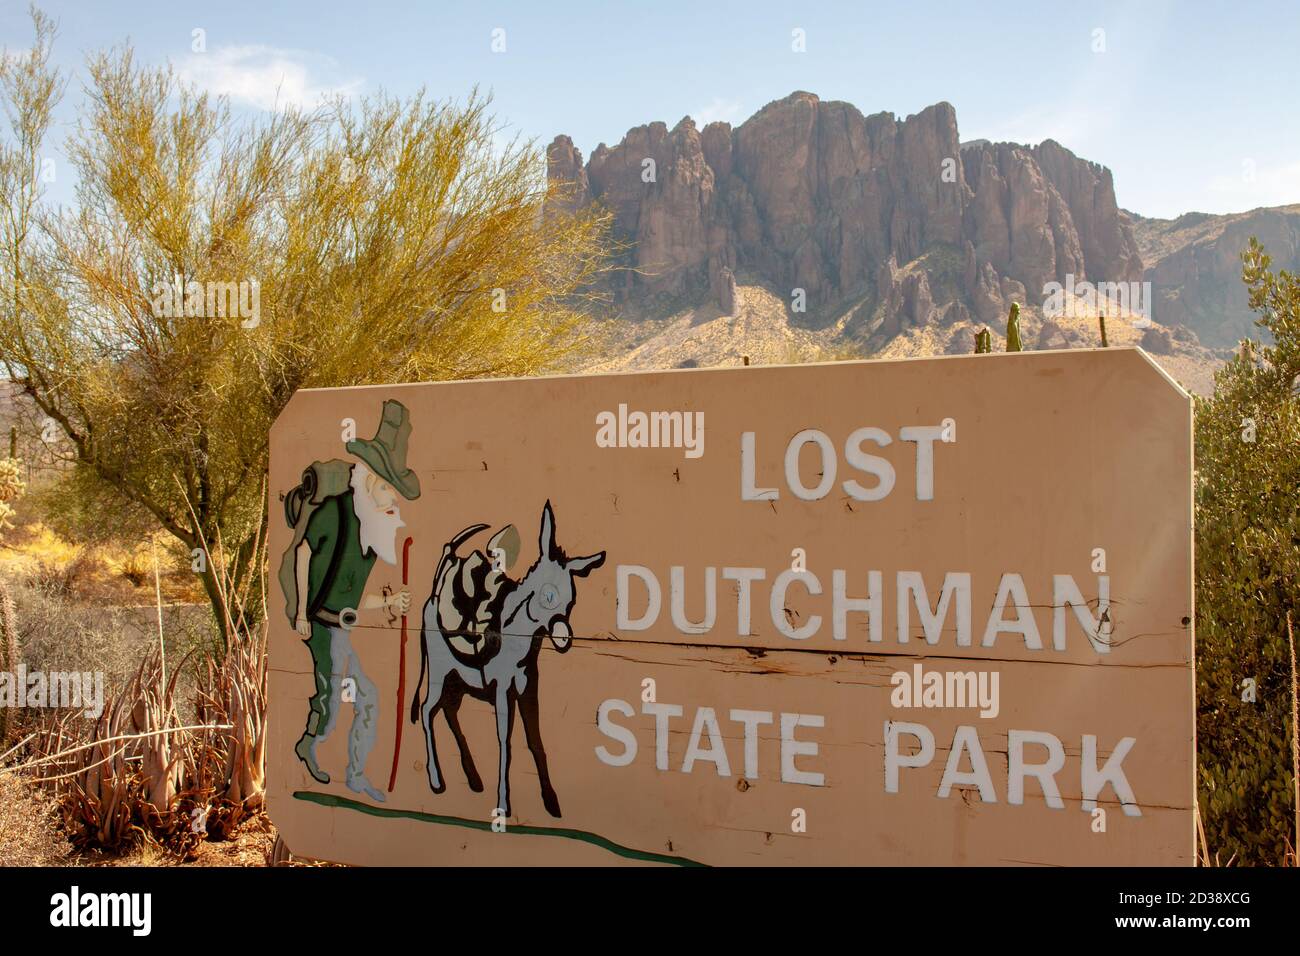 Apache Junction, AZ / USA - October 7 2020: Entrance sign to the Lost Dutchman State Park in Apache Junction, Arizona, USA Stock Photo